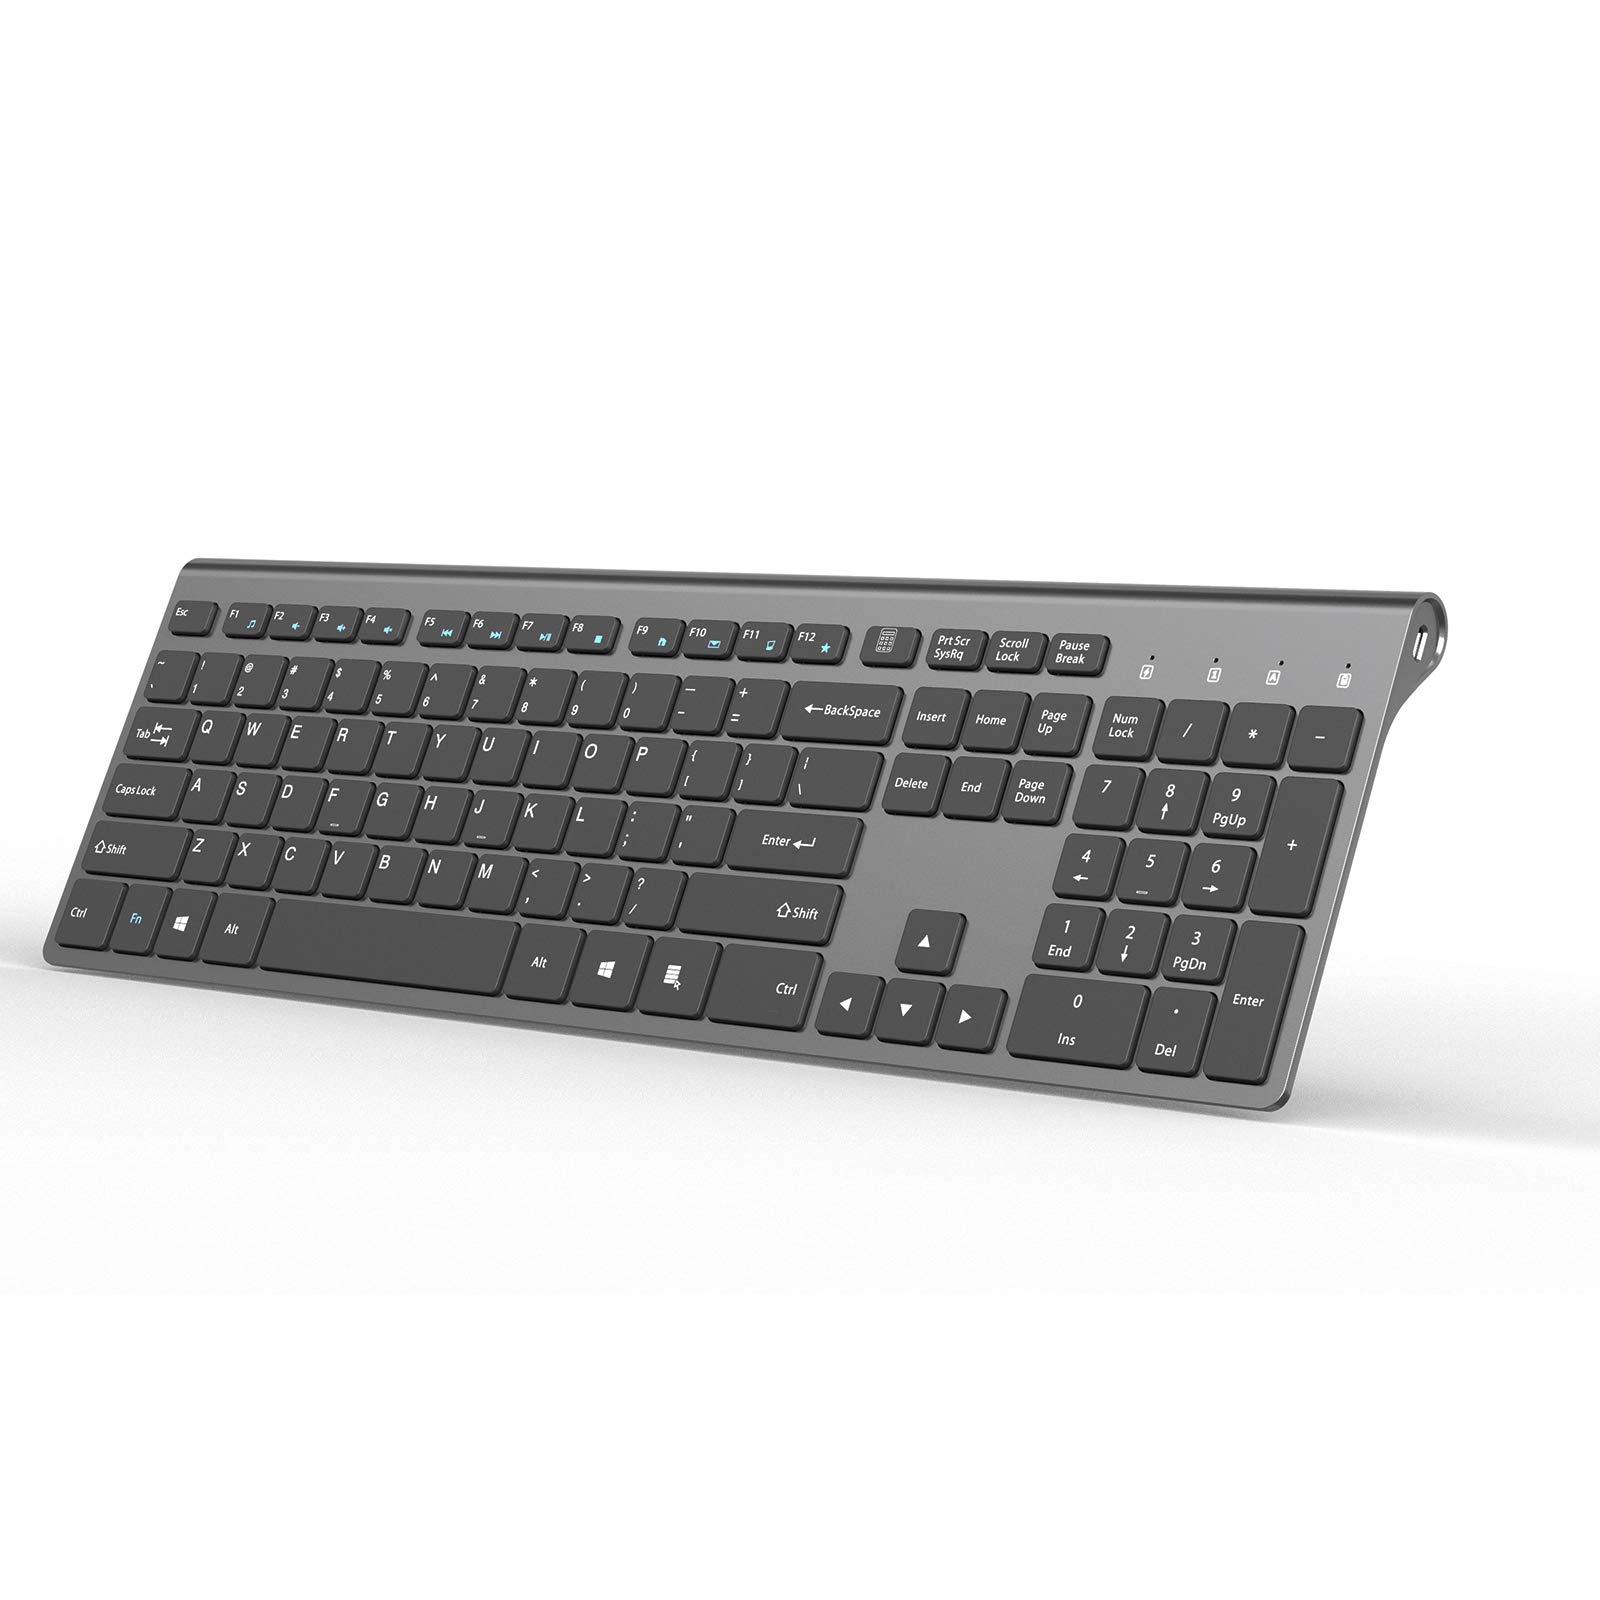 Wireless Keyboard,J JOYACCESS Full Size Rechargeable Quiet Thin Keyboard Wireless for Laptop,Computer,Desktop,PC,Surface,Smart TV and Windows,Black and Gray
